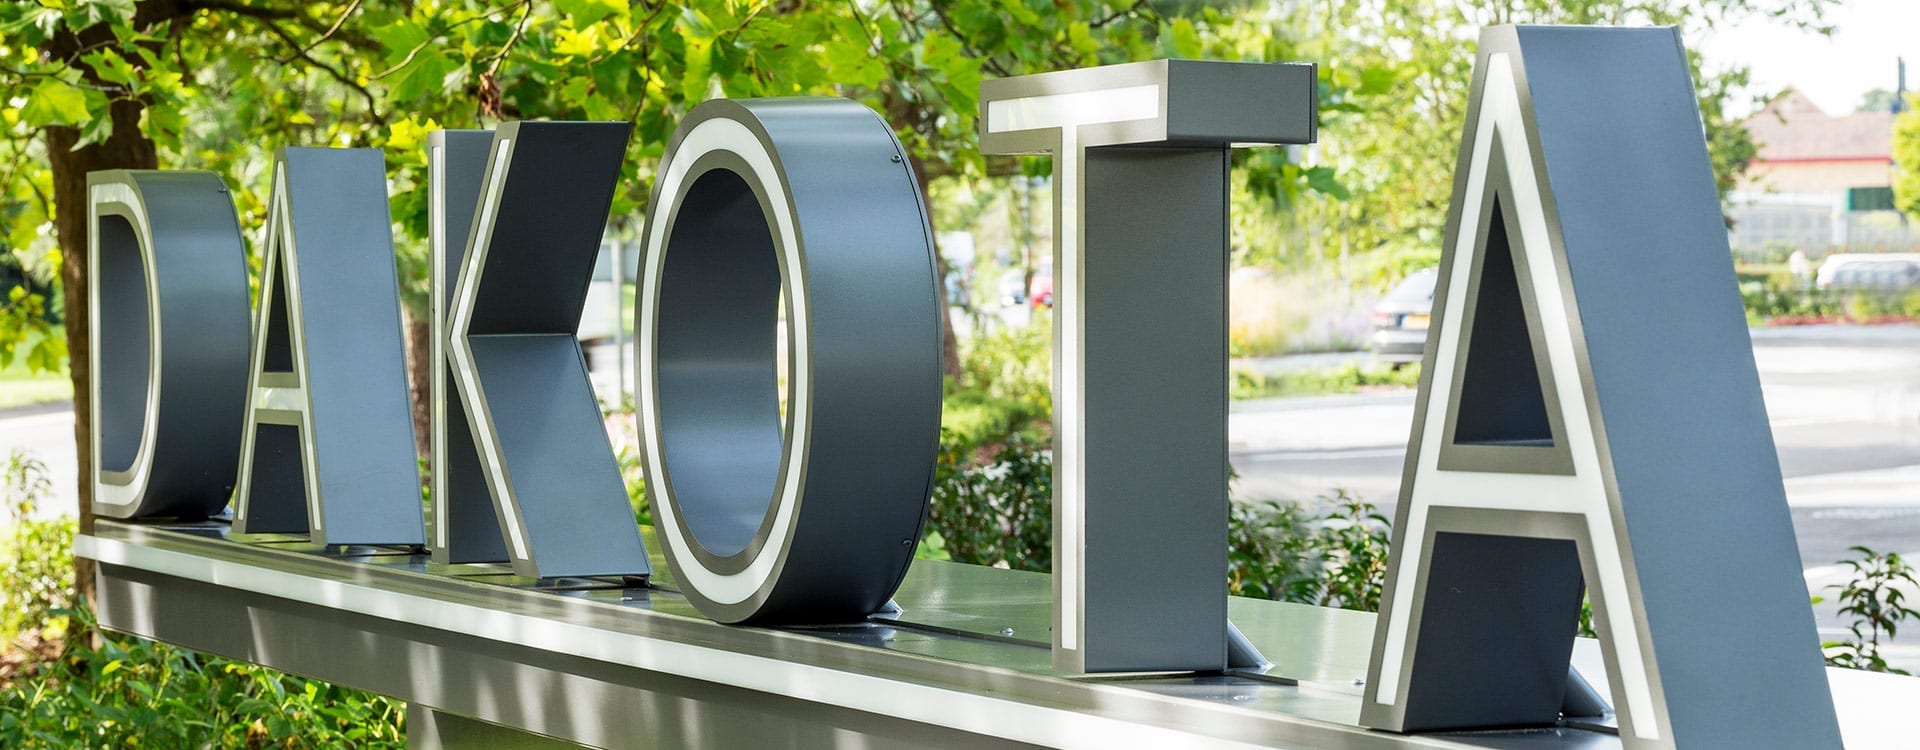 Metal letters for outdoor signage